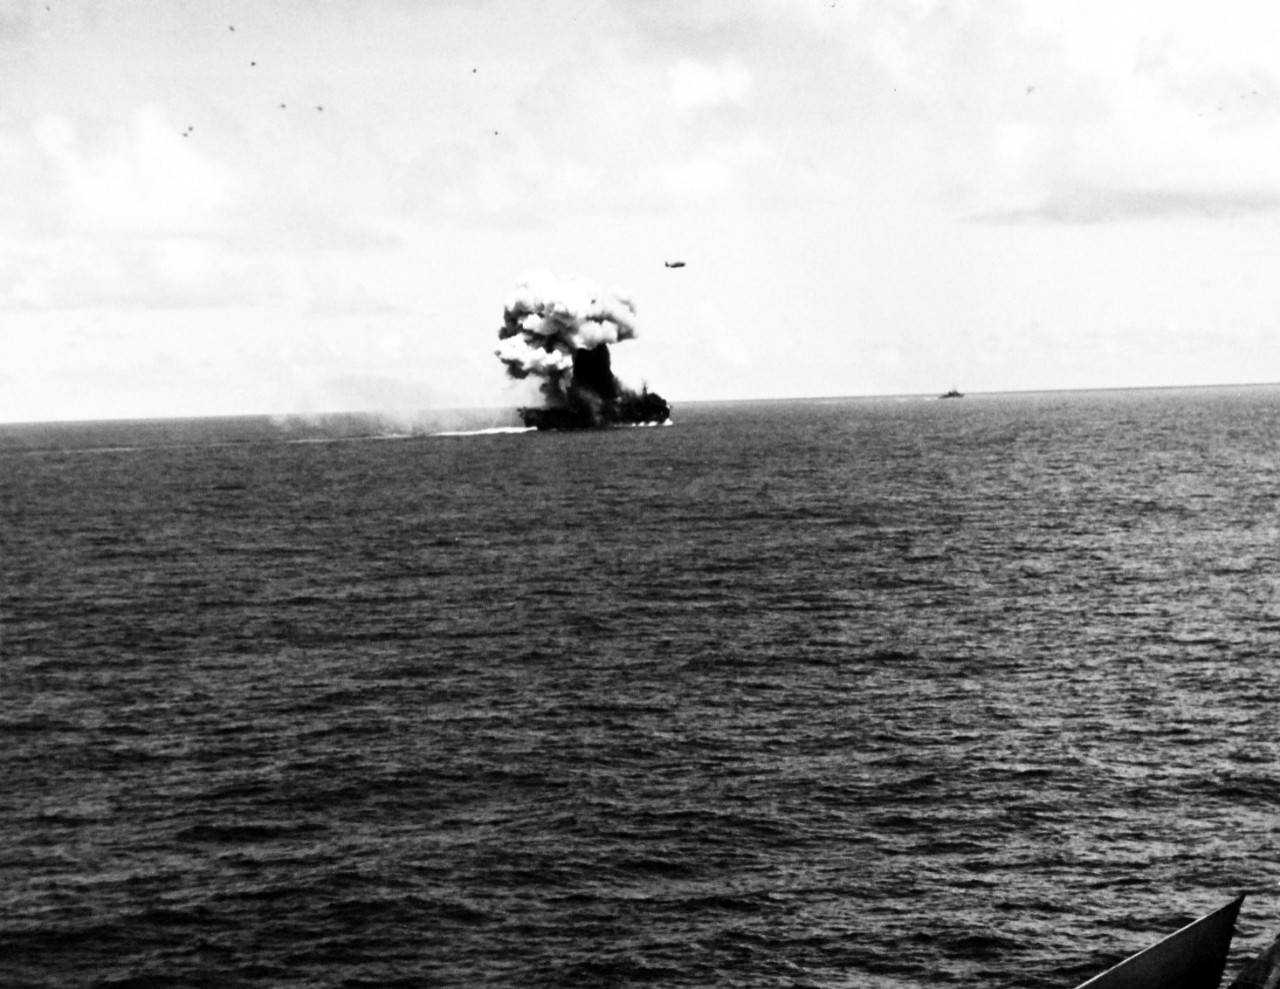 80-G-270618:  Battle off Samar, Japanese Kamikaze, October 25, 1944.    Fires and explosion on the flight deck of USS Suwannee (CVL-27), resulting from a suicide hit of a Japanese “Zero” near Leyte, Philippines.   The airborne plane is friendly.   Taken from USS Sangamon (CVL-26) at Leyte, Philippines.  Official U.S. Navy Photograph, now in the collections of the National Archives.  (2014/4/24). 